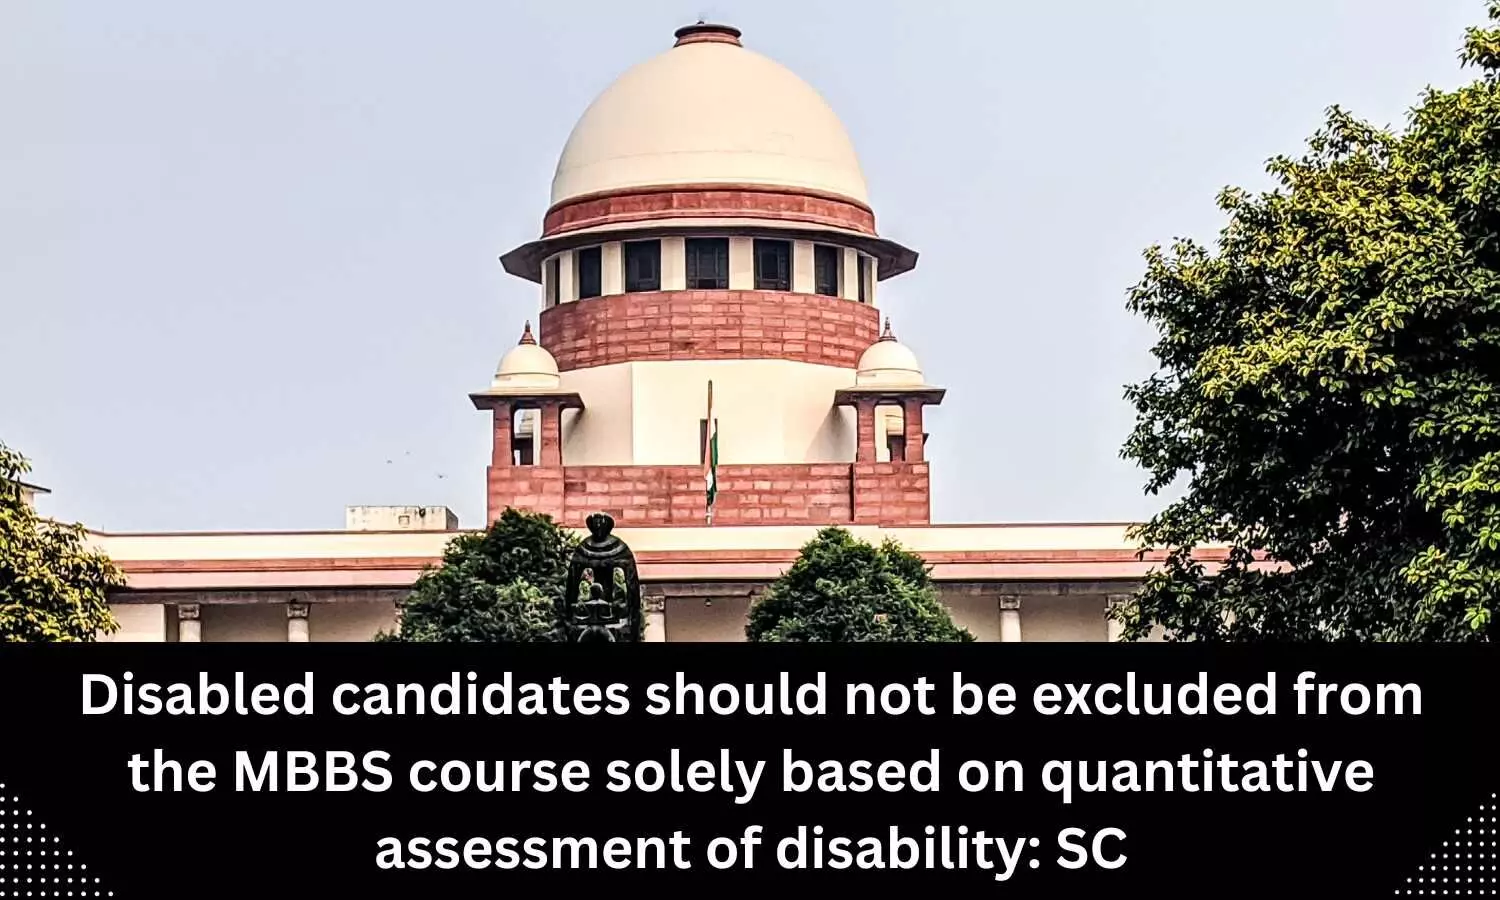 Disabled candidates should not be excluded from the MBBS course solely based on quantitative assessment of disability: SC